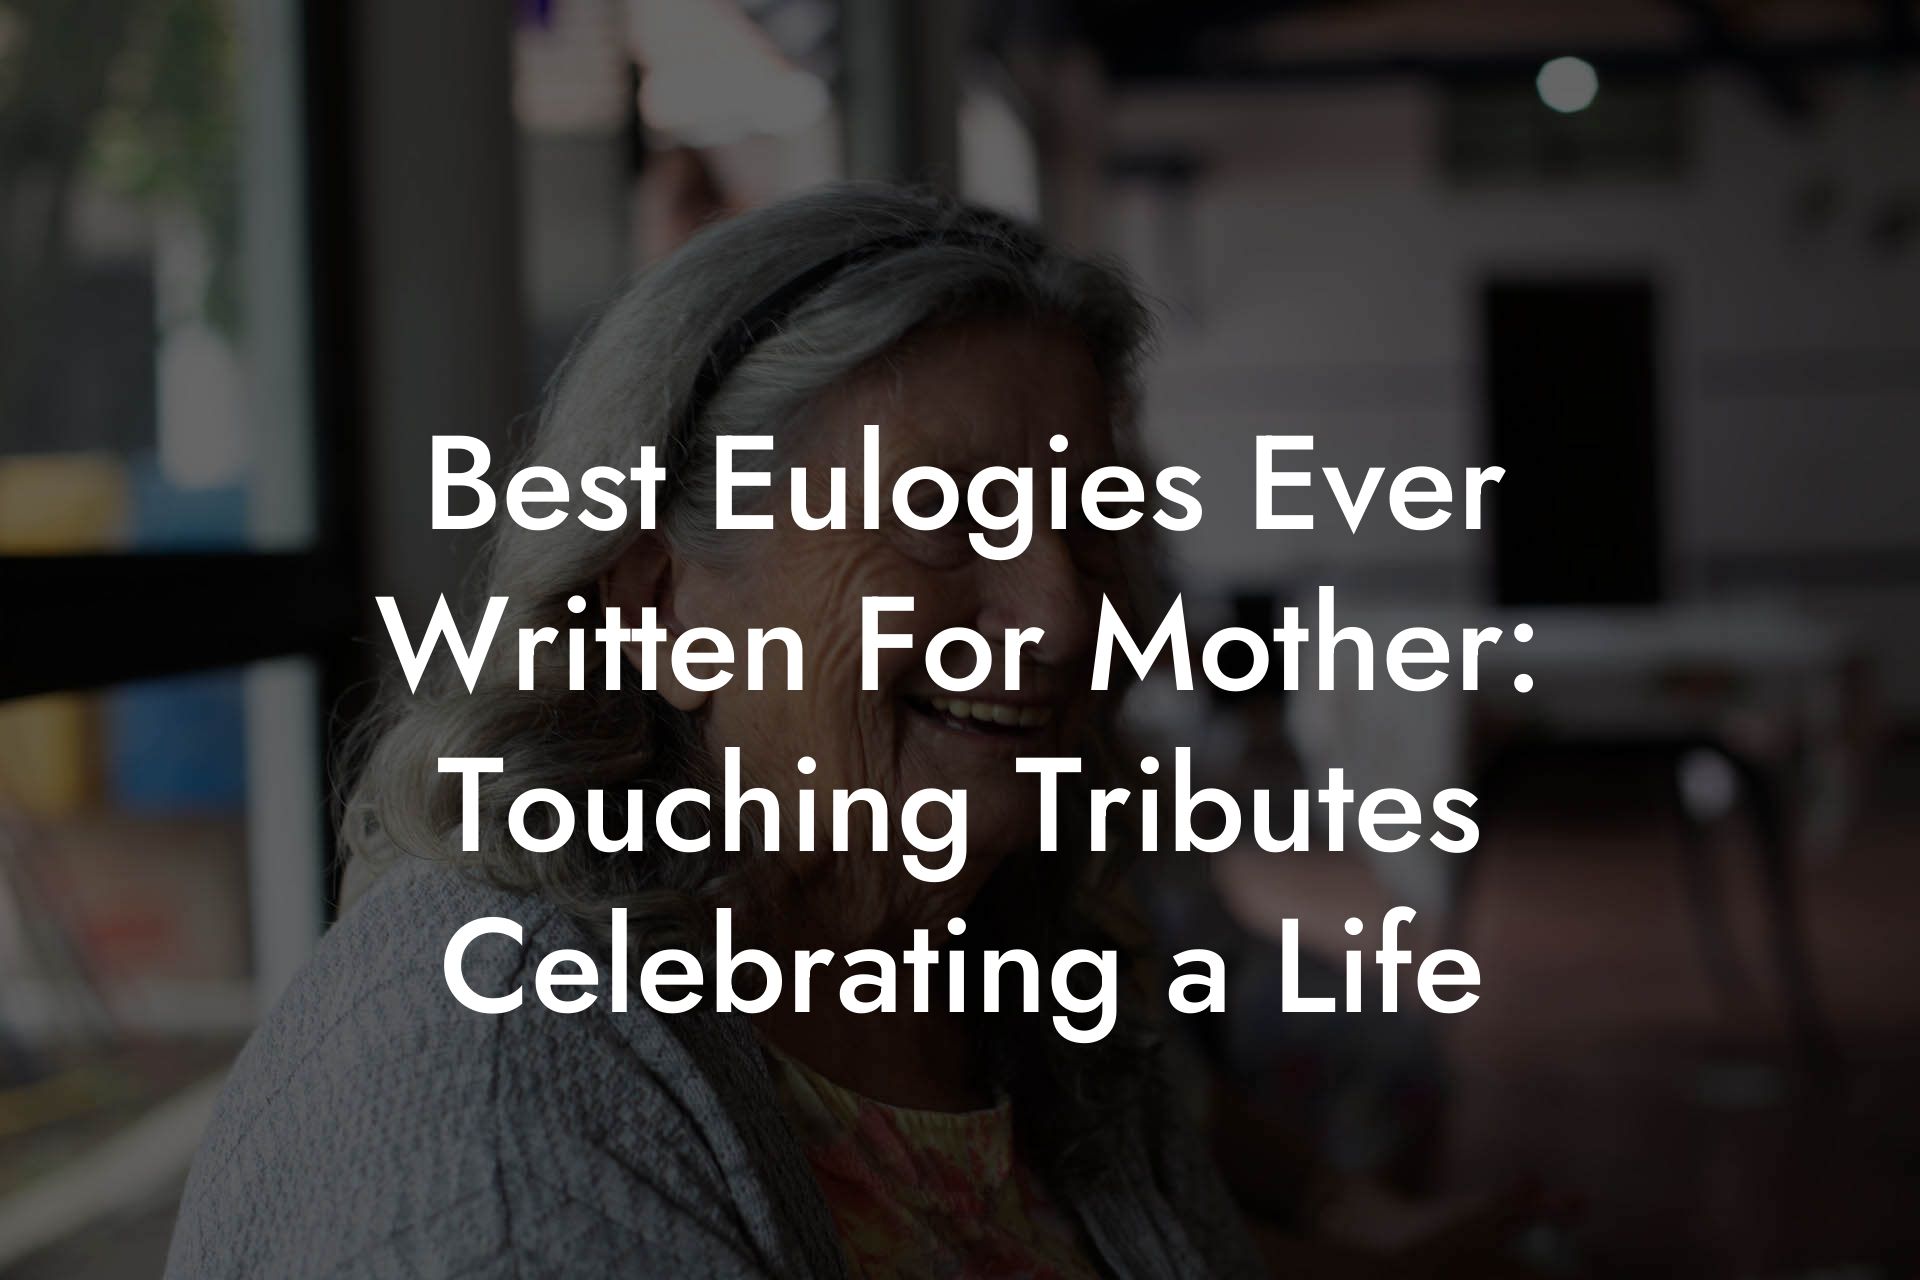 Best Eulogies Ever Written For Mother: Touching Tributes Celebrating a Life